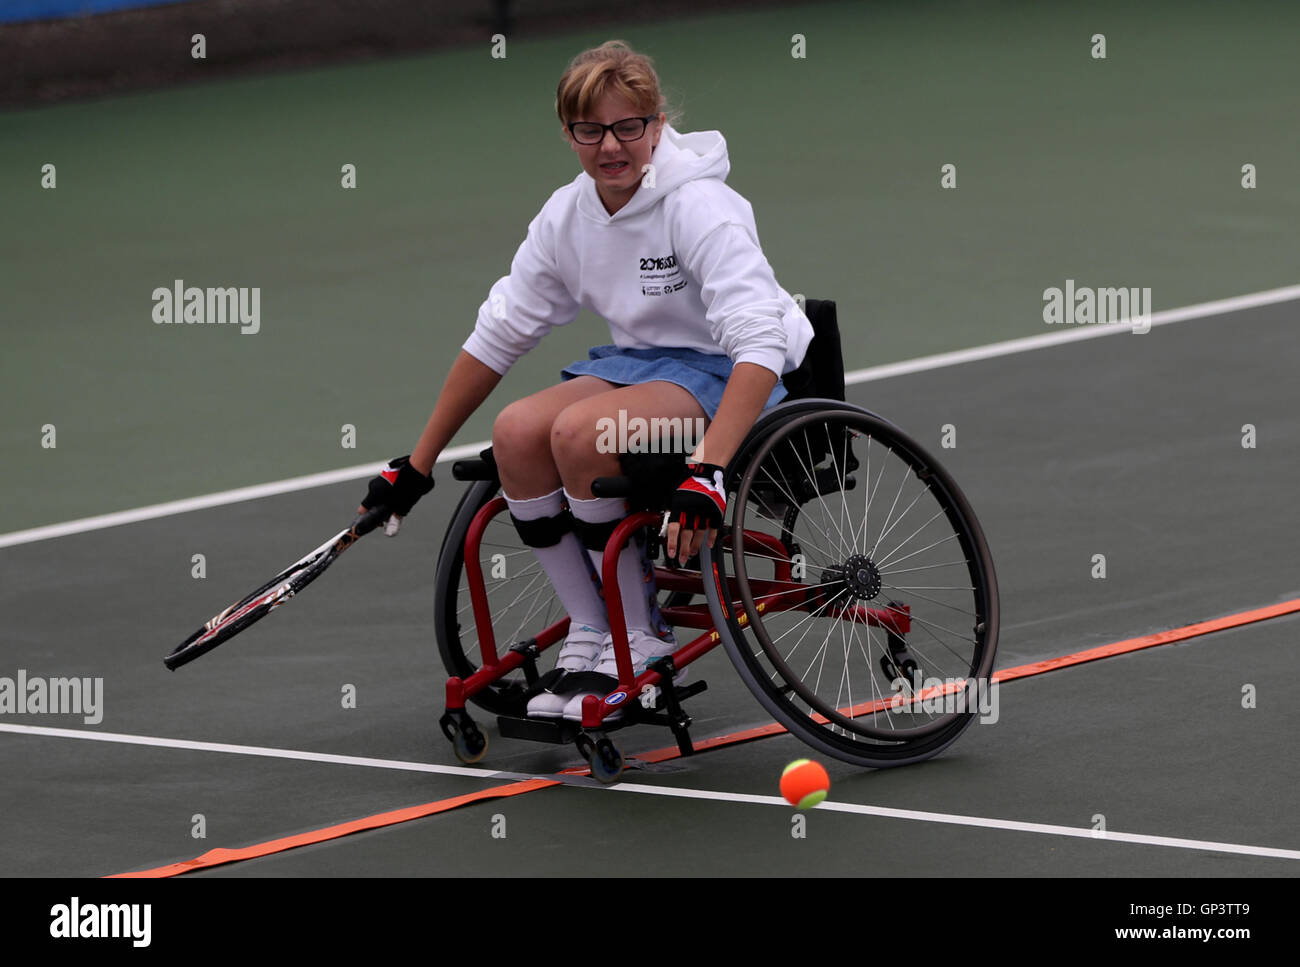 England North's Abbie Breakwell in action during the girls singles wheelchair tennis on day two of the 2016 School Games at Loughborough University, Loughborough. Stock Photo